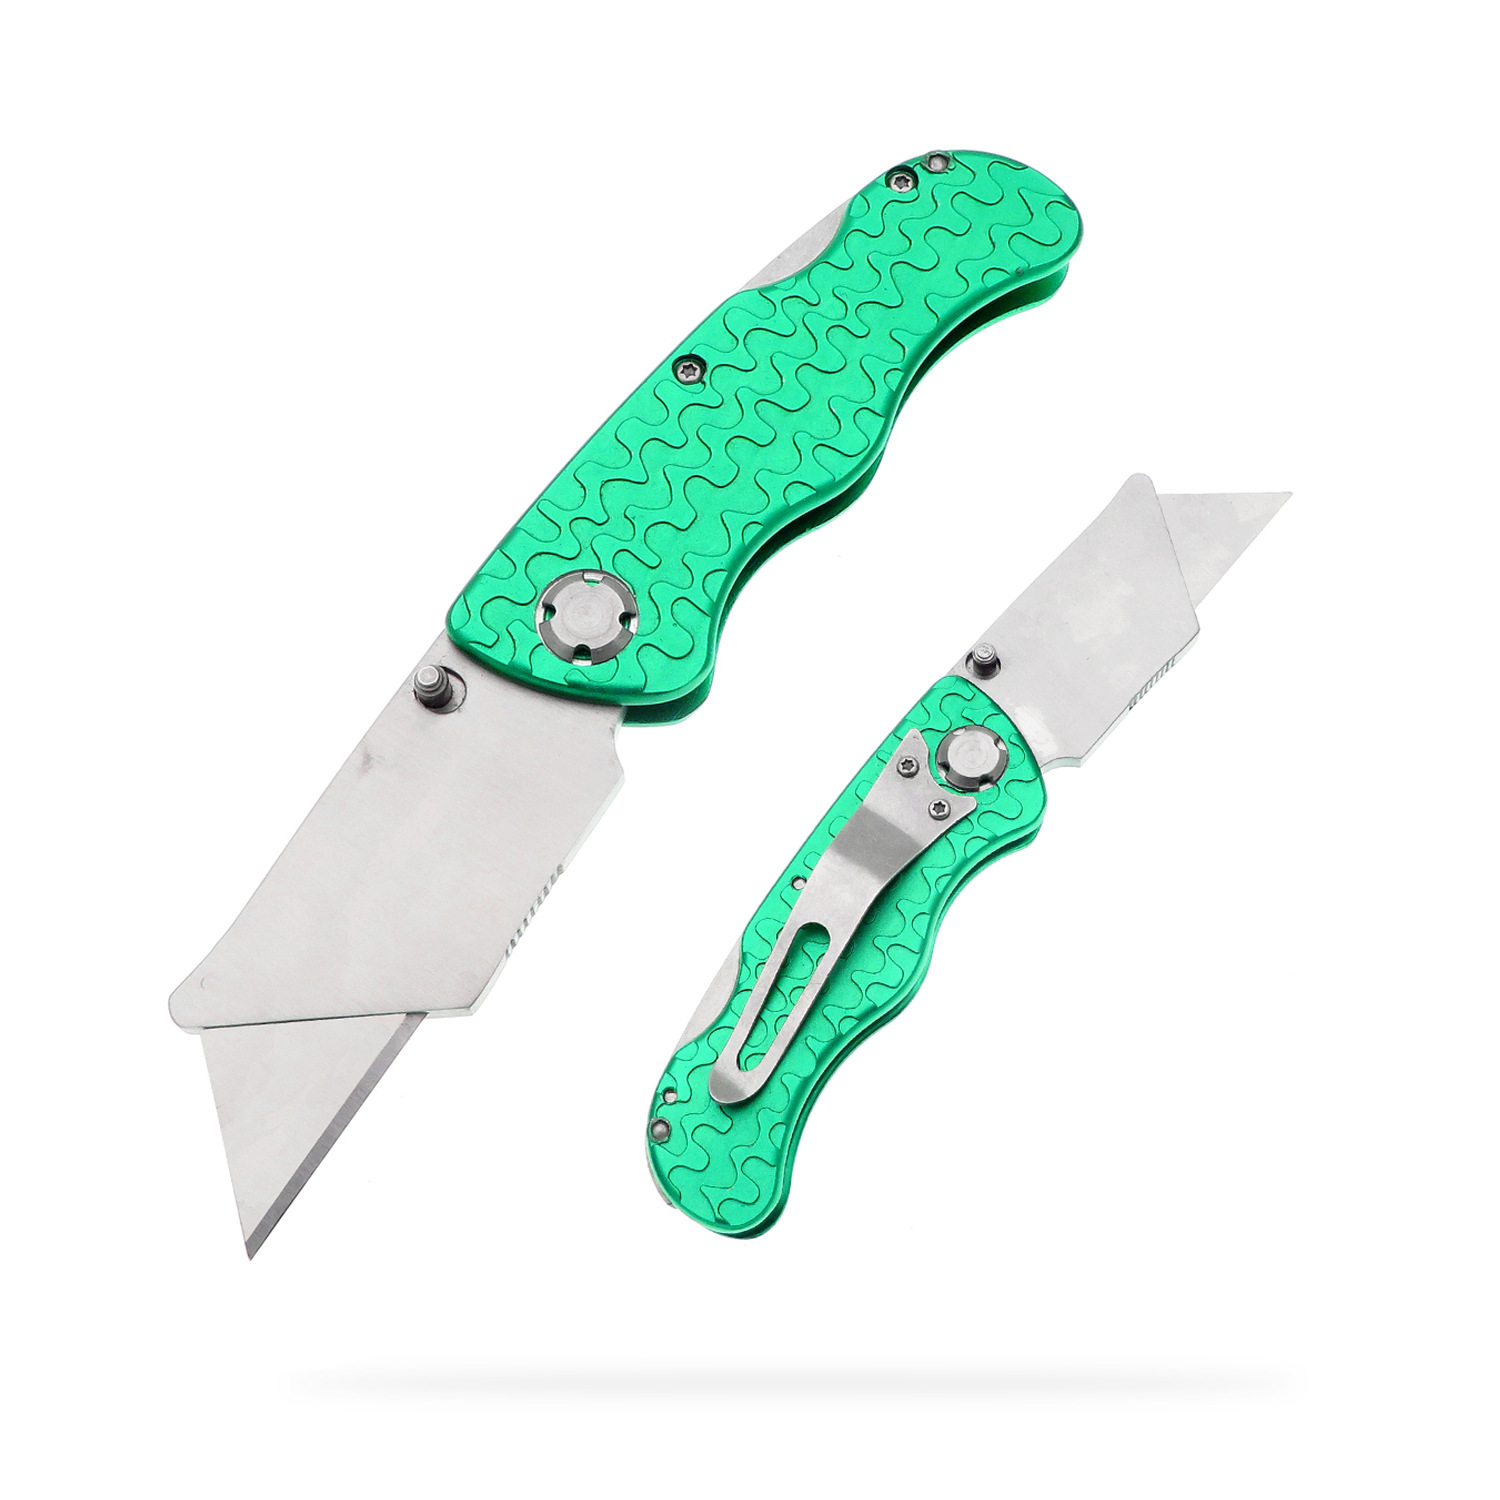 Manufacturers Supply Stainless Steel Aluminum Alloy Folding Utility Knife Manual Knife Cutting Paper Knife Intermediary Knife Express Parcel Opening Knife